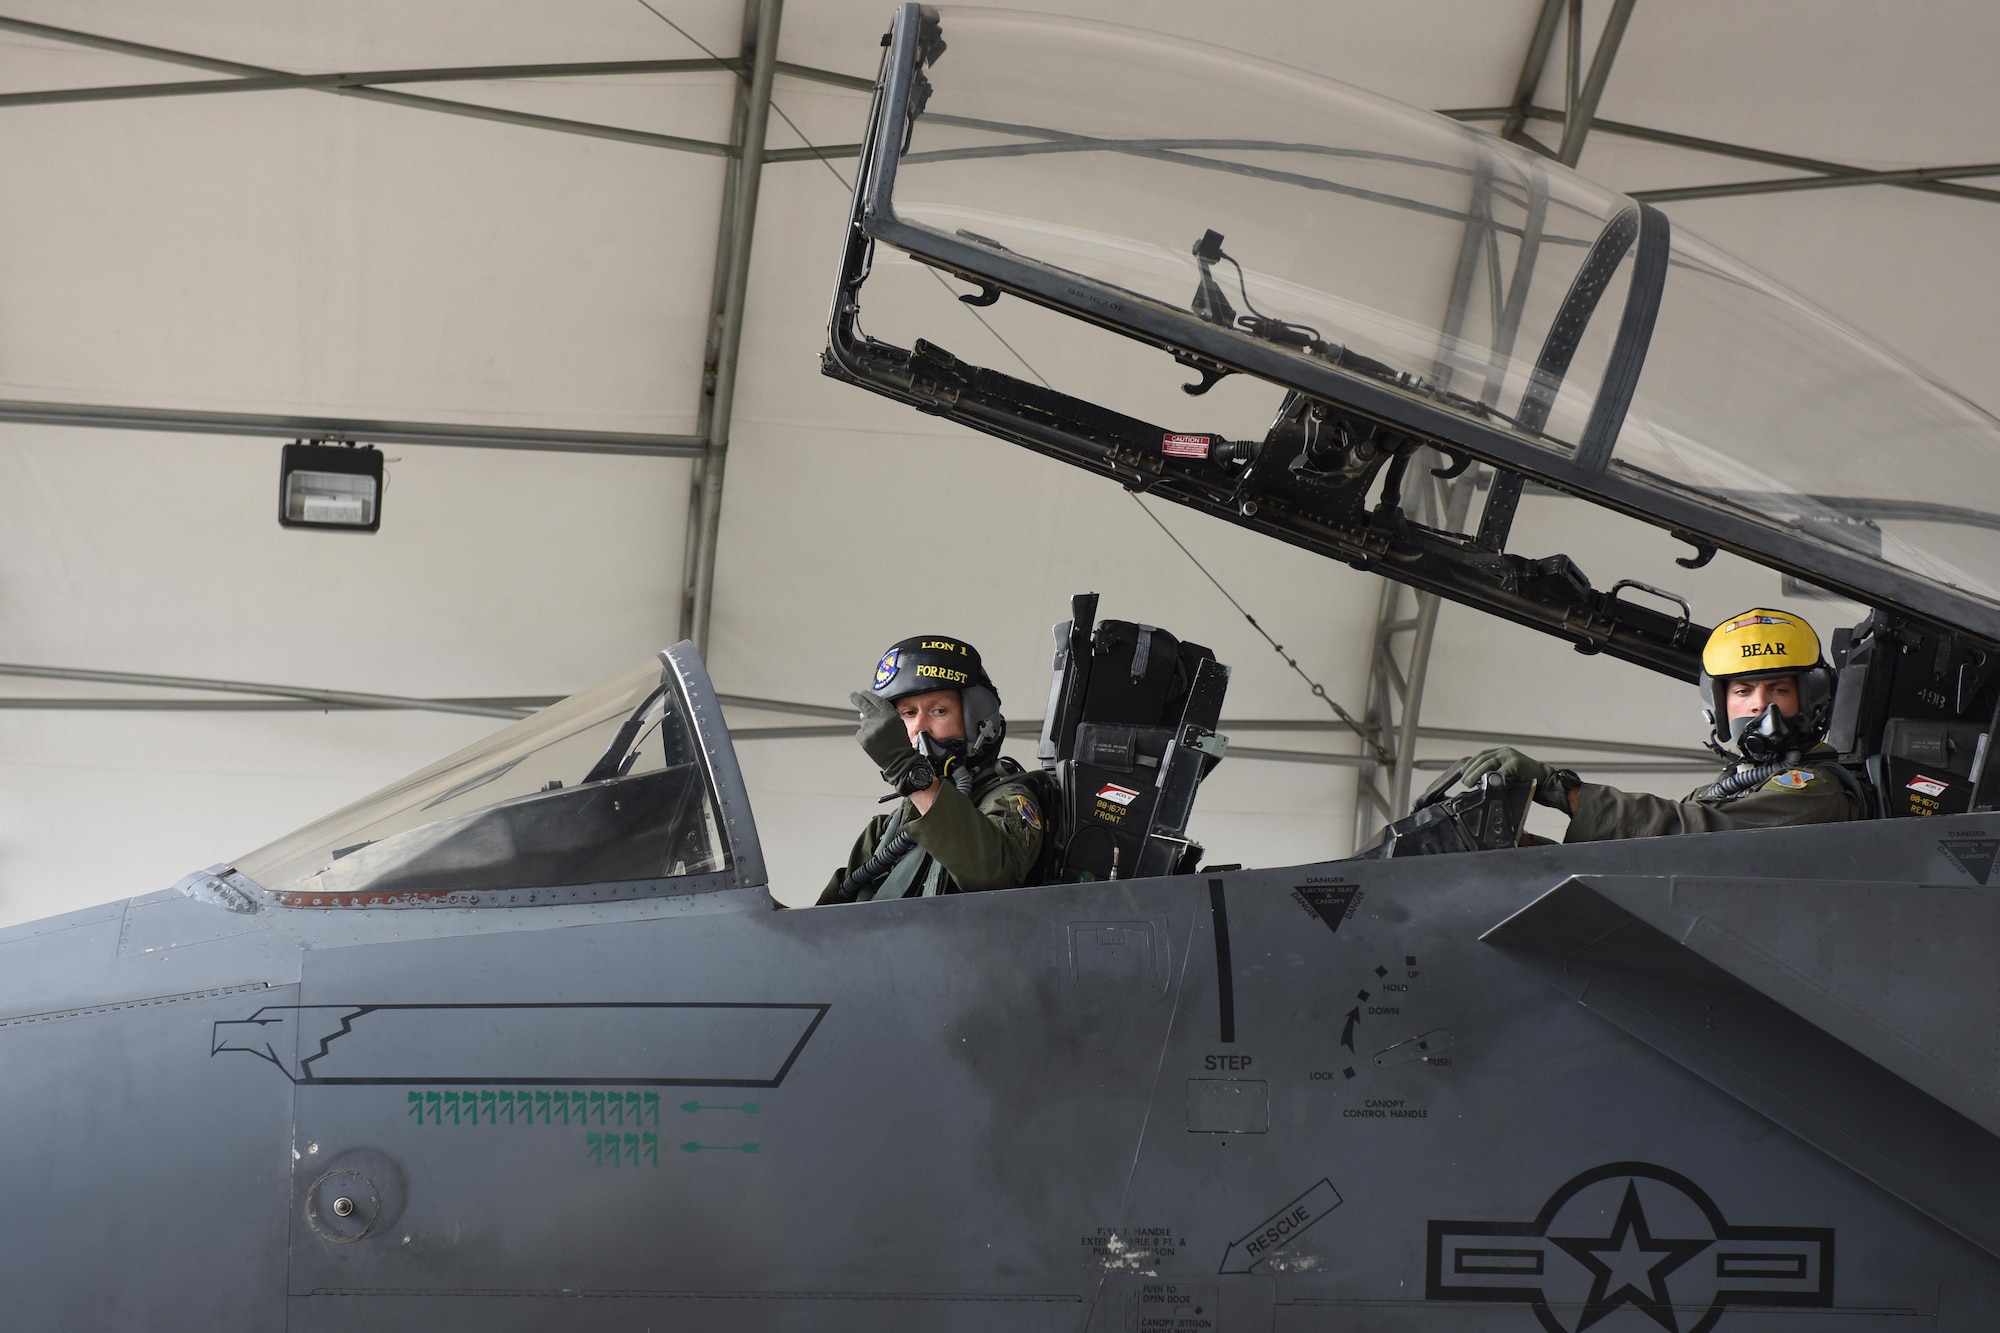 Col. Christopher Sage (left), 4th Fighter Wing commander, and Maj. Brian Privette (right), 4th Fighter Wing executive officer, prepare to take off for Robins Air Force Base, Georgia, Nov. 30, 2016, at Seymour Johnson Air Force Base, North Carolina. Sage flew an F-15E Strike Eagle to Robins AFB for a programmed depot maintenance. (U.S. Air Force photo by Airman Miranda A. Loera)